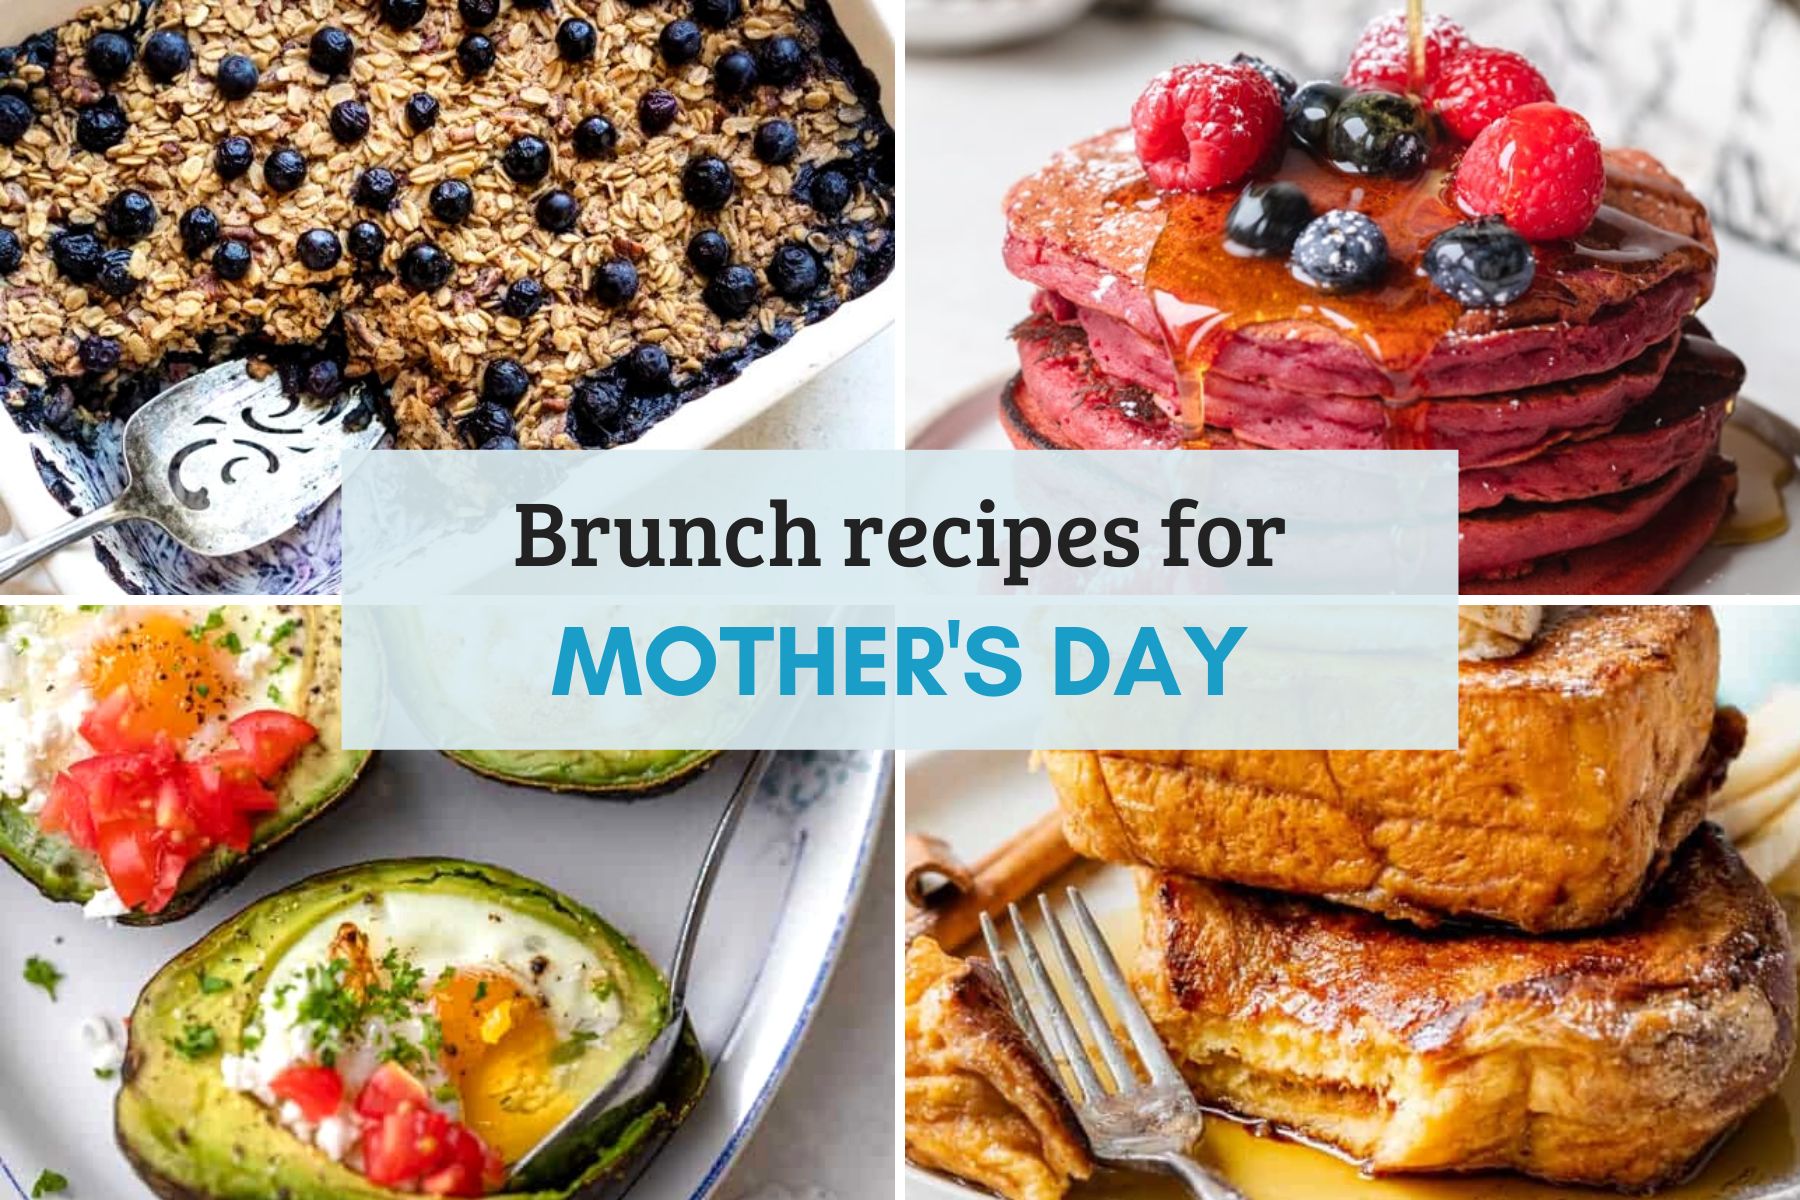 Mother's Day Brunch Ideas image for landing page.